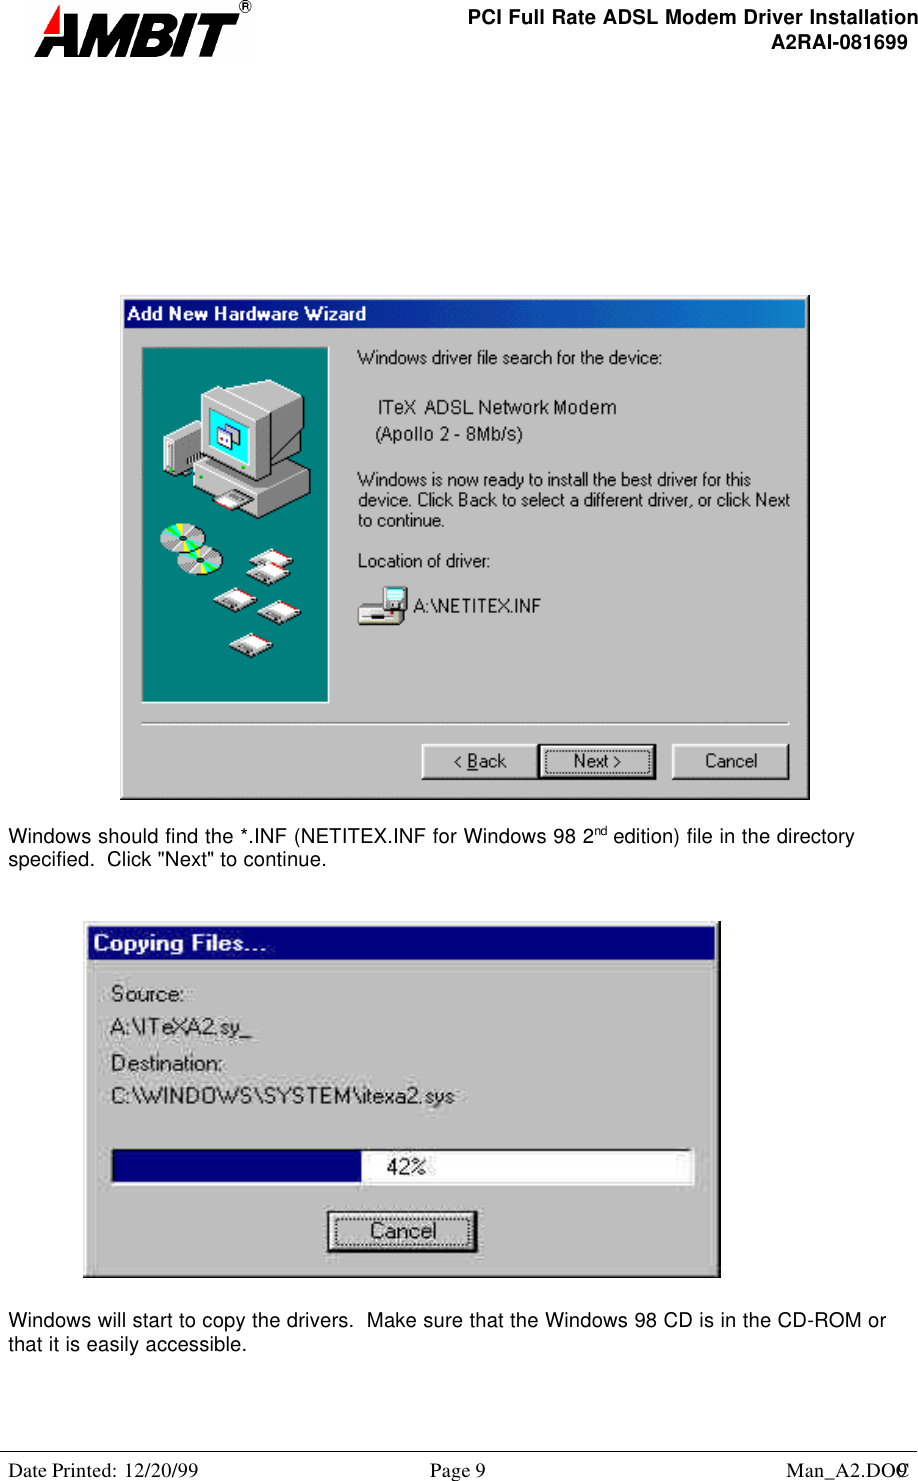 PCI Full Rate ADSL Modem Driver InstallationA2RAI-081699Date Printed: 12/20/99 Page 9 Man_A2.DOC9Windows should find the *.INF (NETITEX.INF for Windows 98 2nd edition) file in the directoryspecified.  Click &quot;Next&quot; to continue.Windows will start to copy the drivers.  Make sure that the Windows 98 CD is in the CD-ROM orthat it is easily accessible.